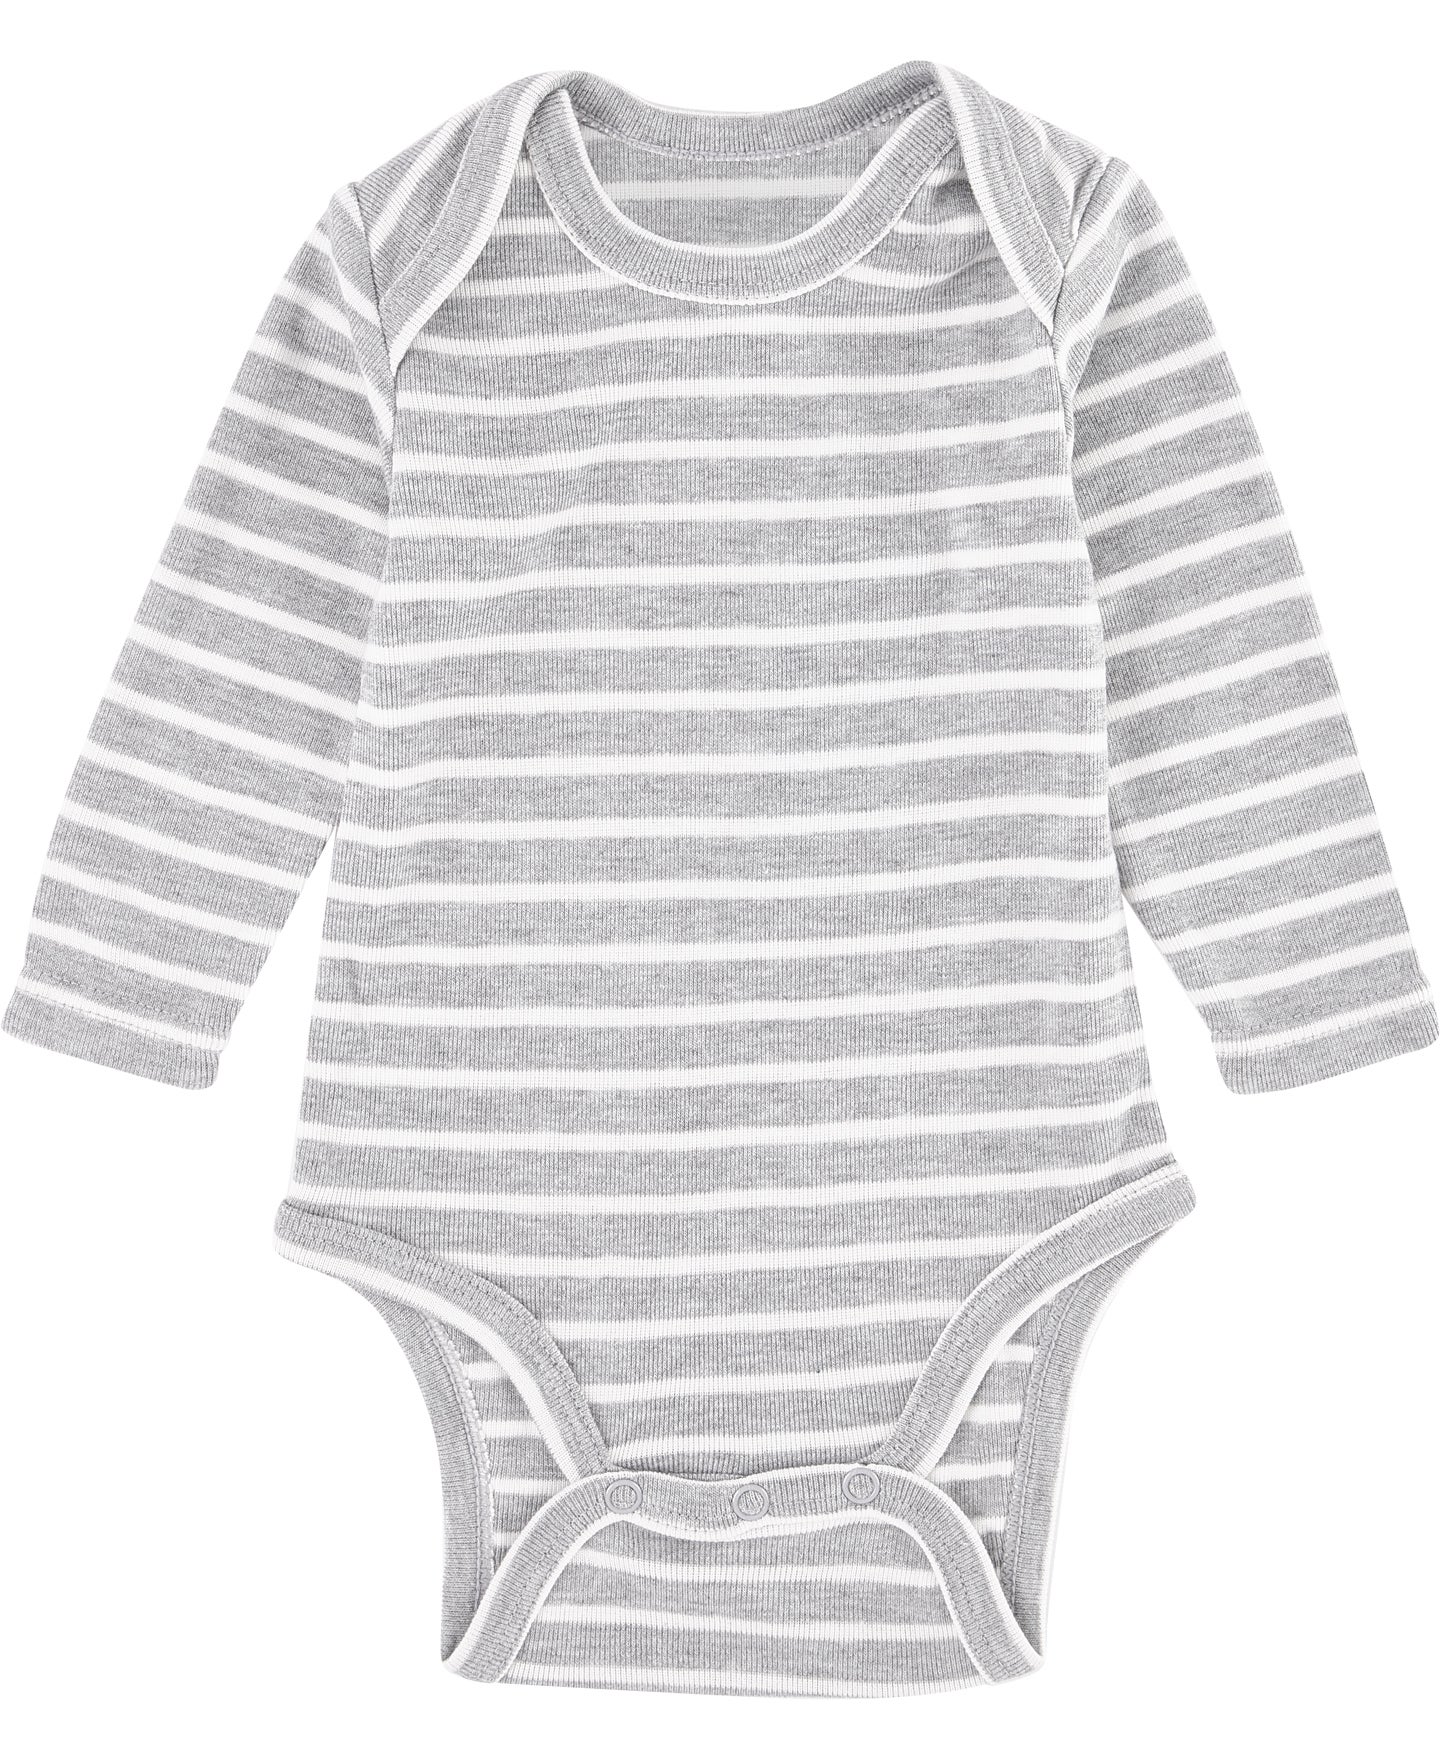 Infant Thermo Thermal Long Sleeve Bodysuit in Grey Marl/white